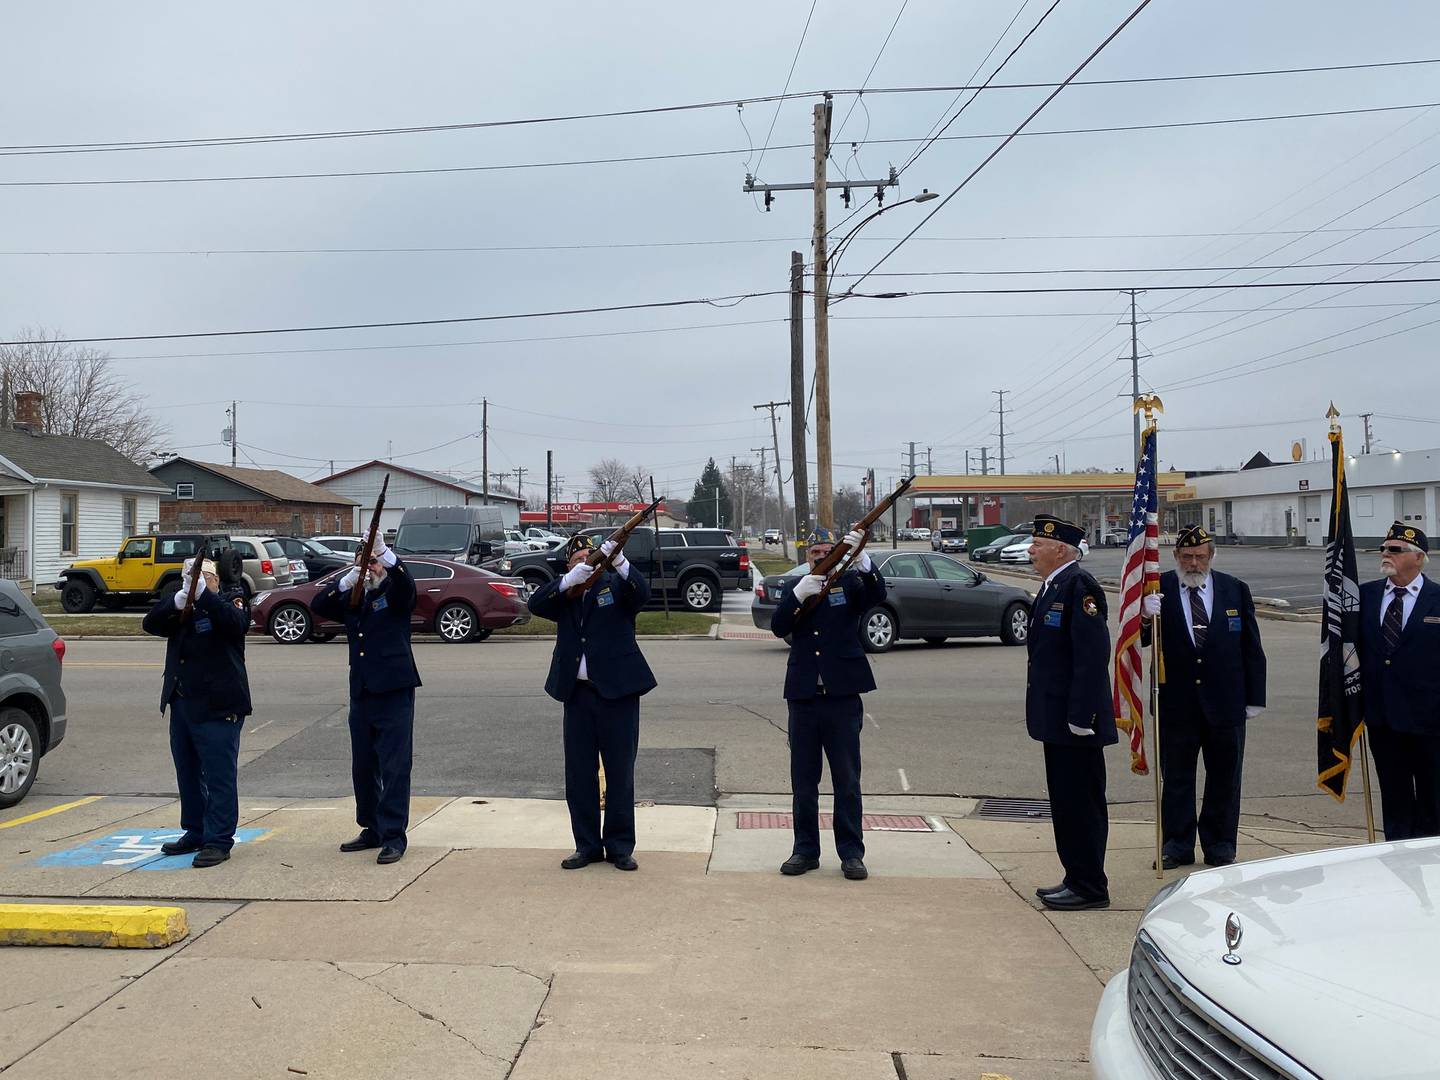 The American Legion Honor Guard fires rifles at the Ottawa VFW Wednesday morning.